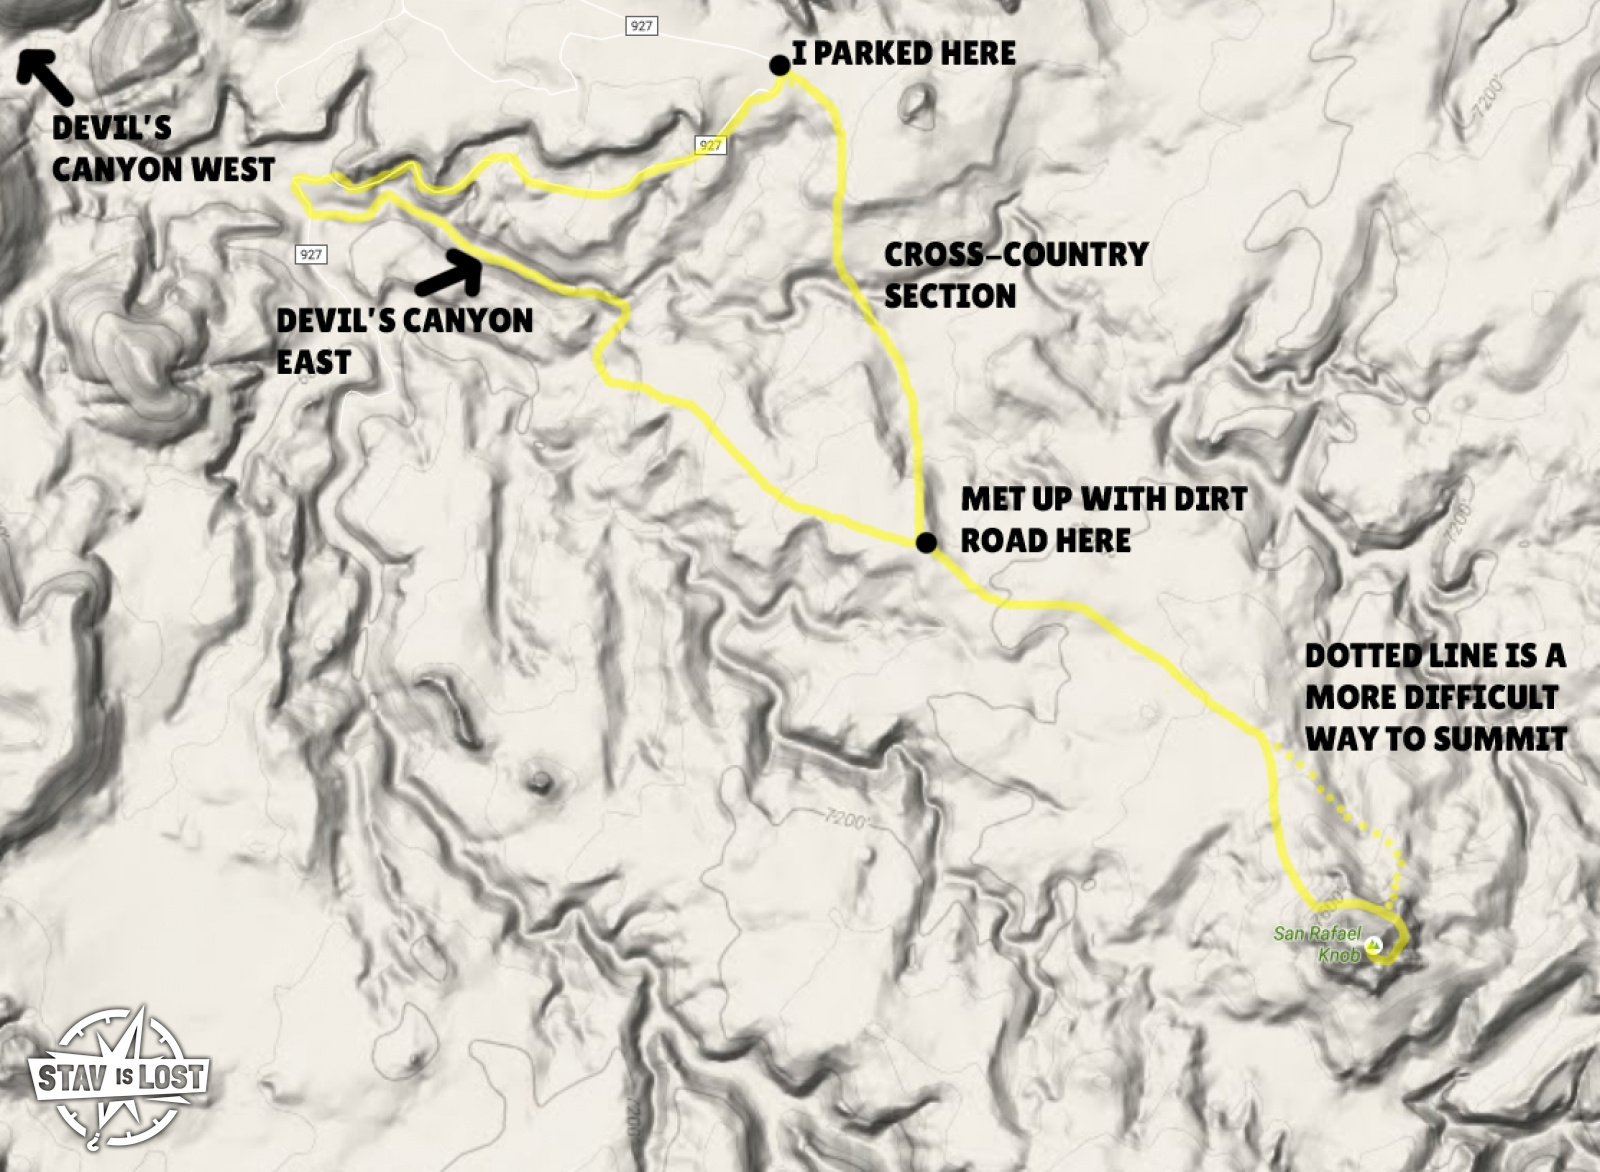 map for San Rafael Knob and Devil's Canyon East by stav is lost